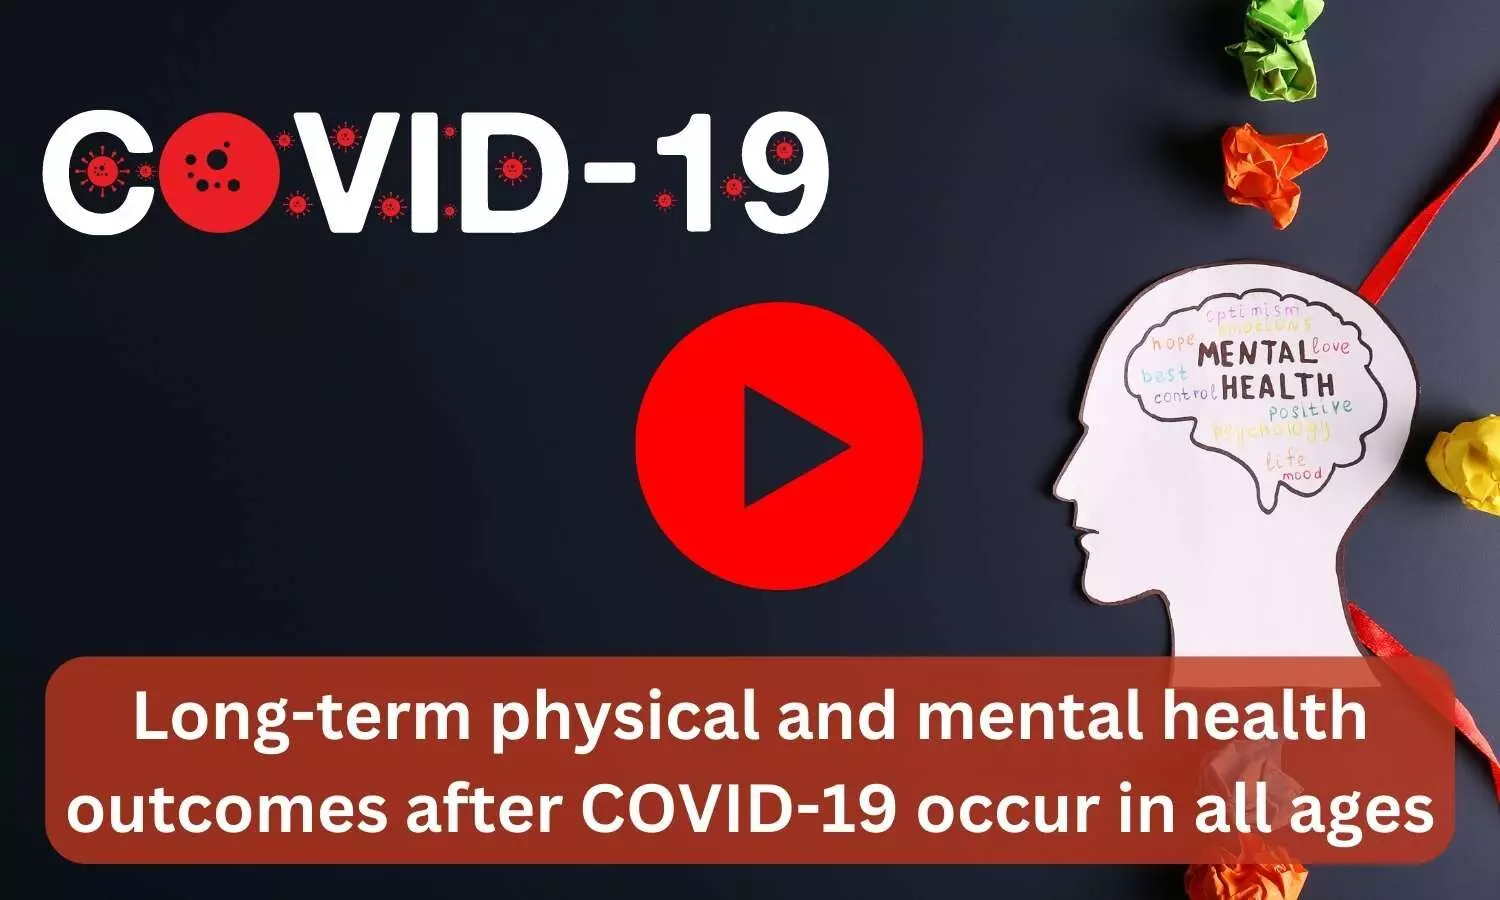 Long-term physical and mental health outcomes after COVID-19 occur in all ages